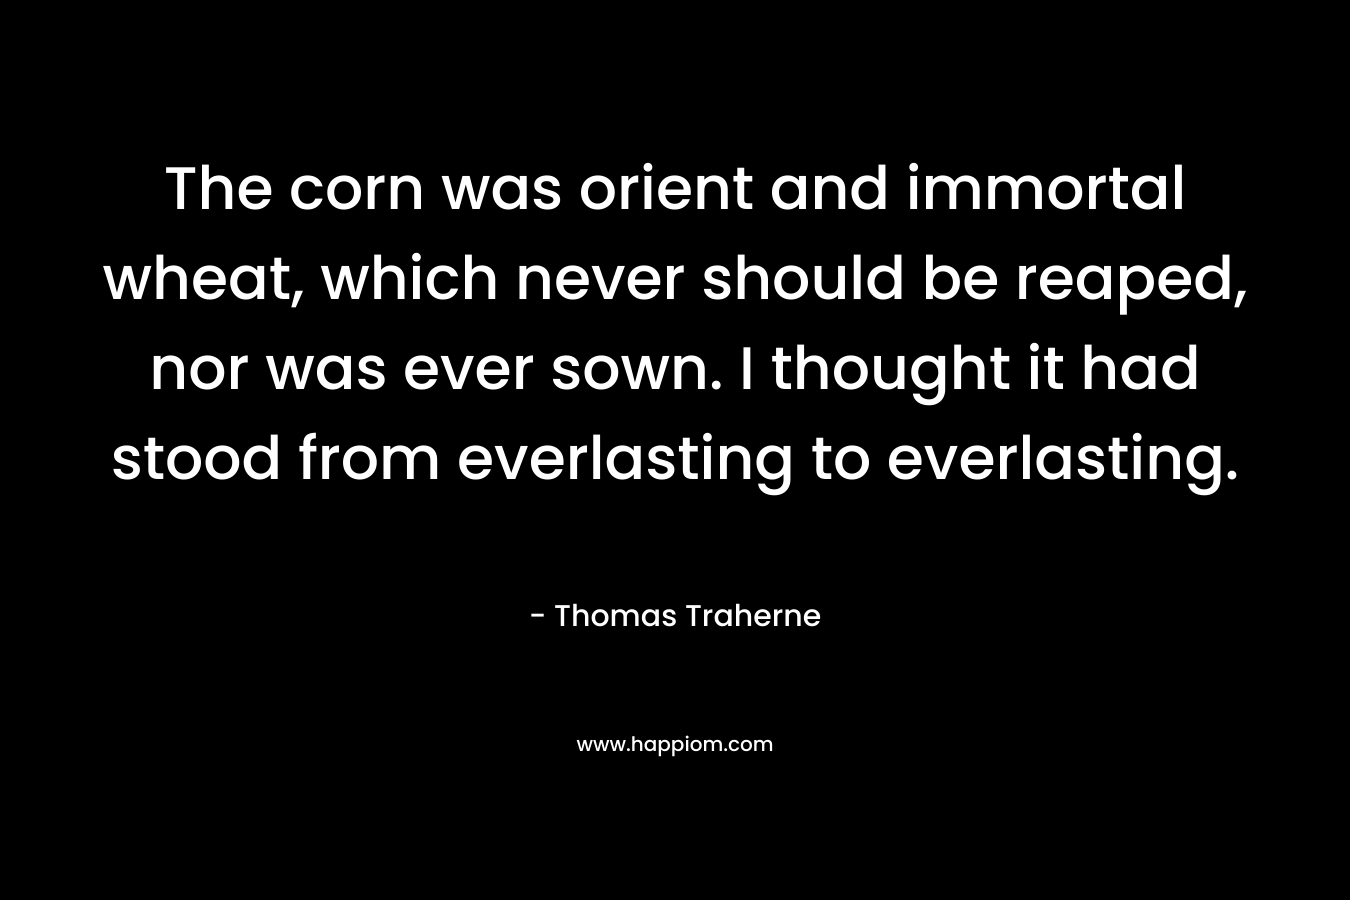 The corn was orient and immortal wheat, which never should be reaped, nor was ever sown. I thought it had stood from everlasting to everlasting. – Thomas Traherne